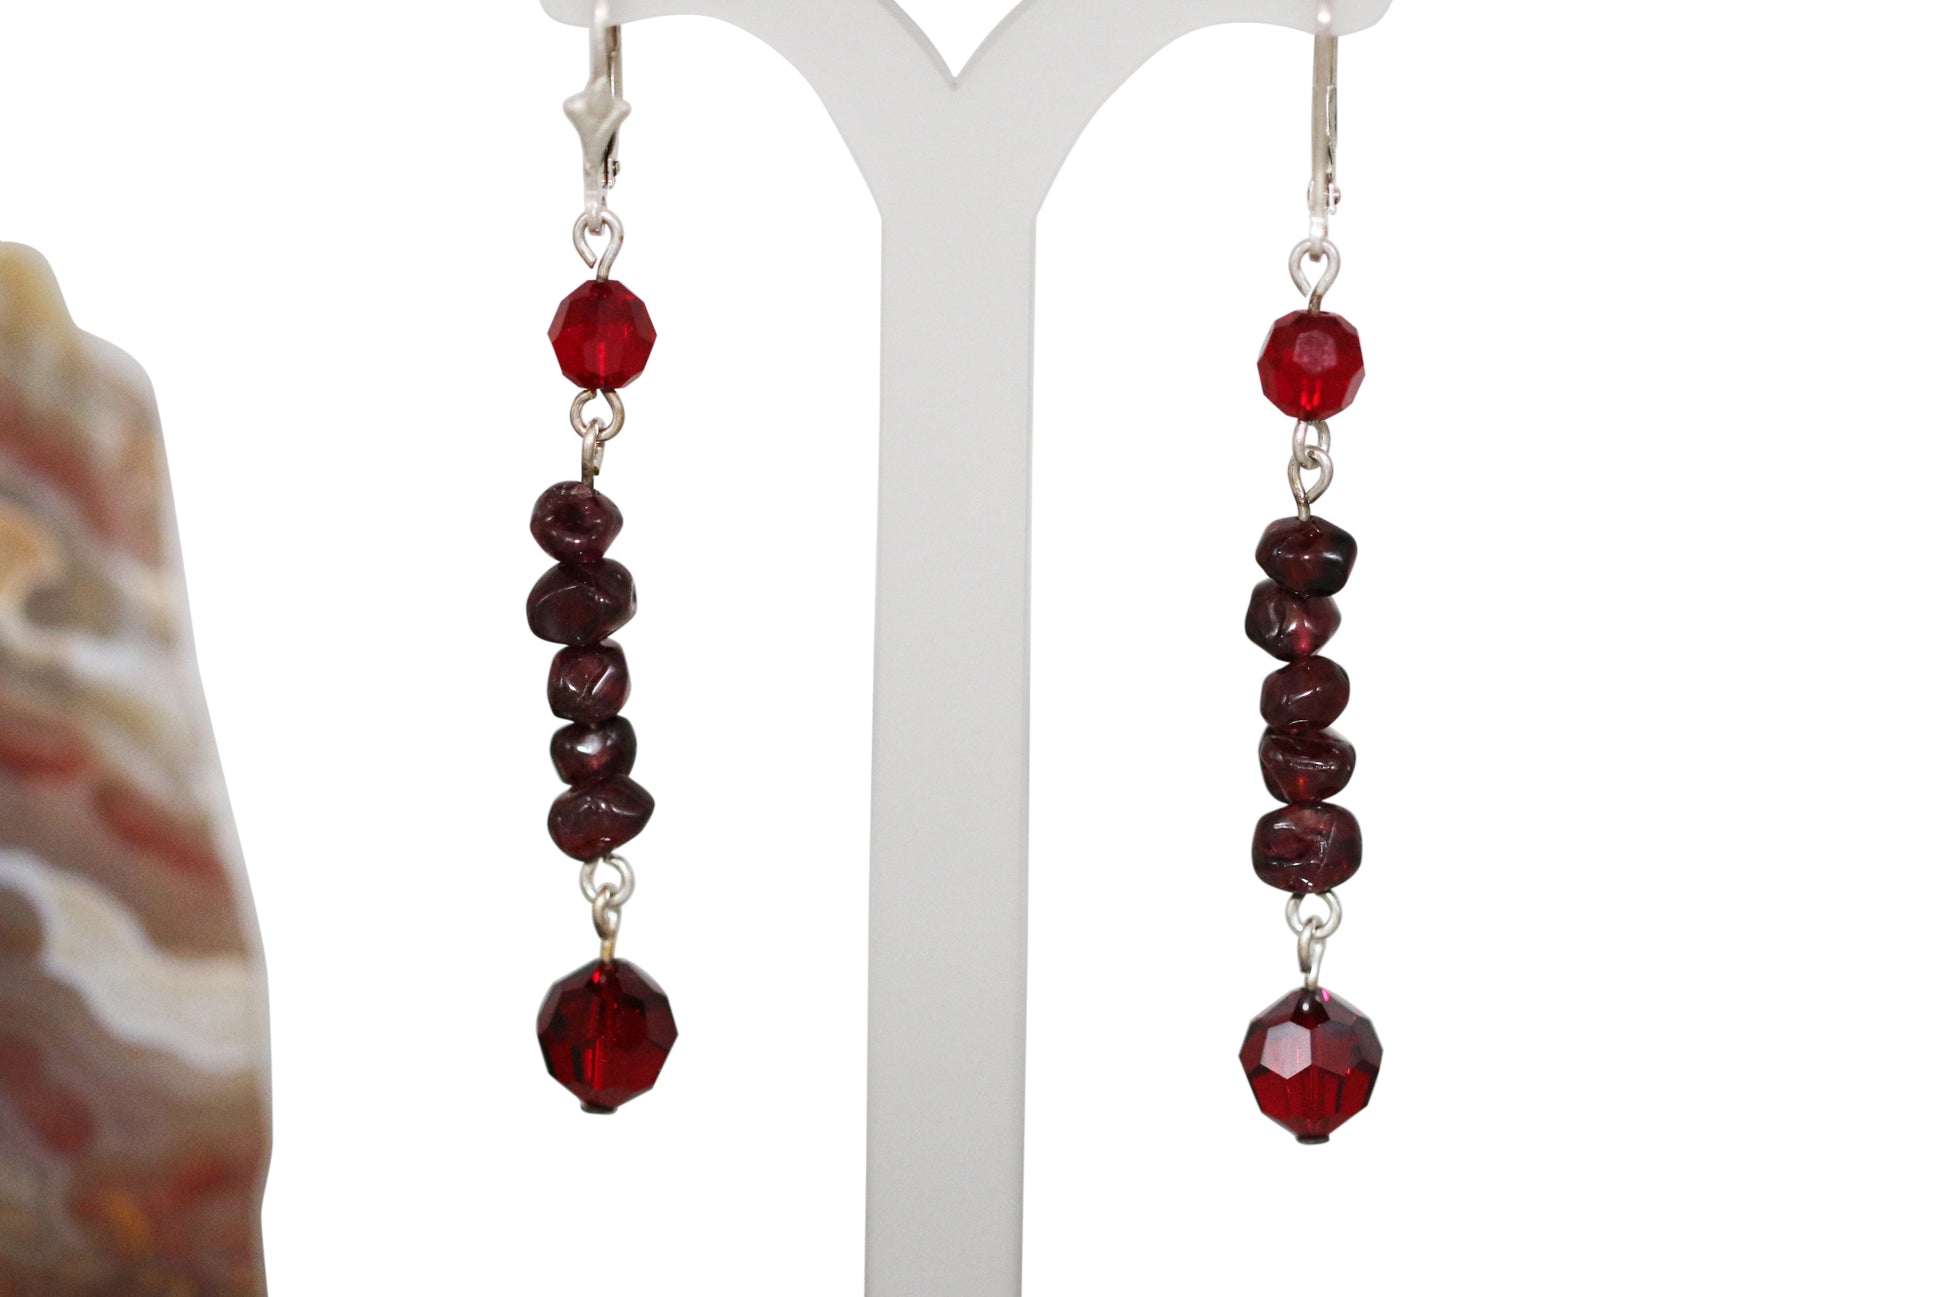 Garnet Natural Gemstone Chips Sterling Silver Leverback Earrings with Siam Austrian Crystals - Annabel's Jewelry & Leather